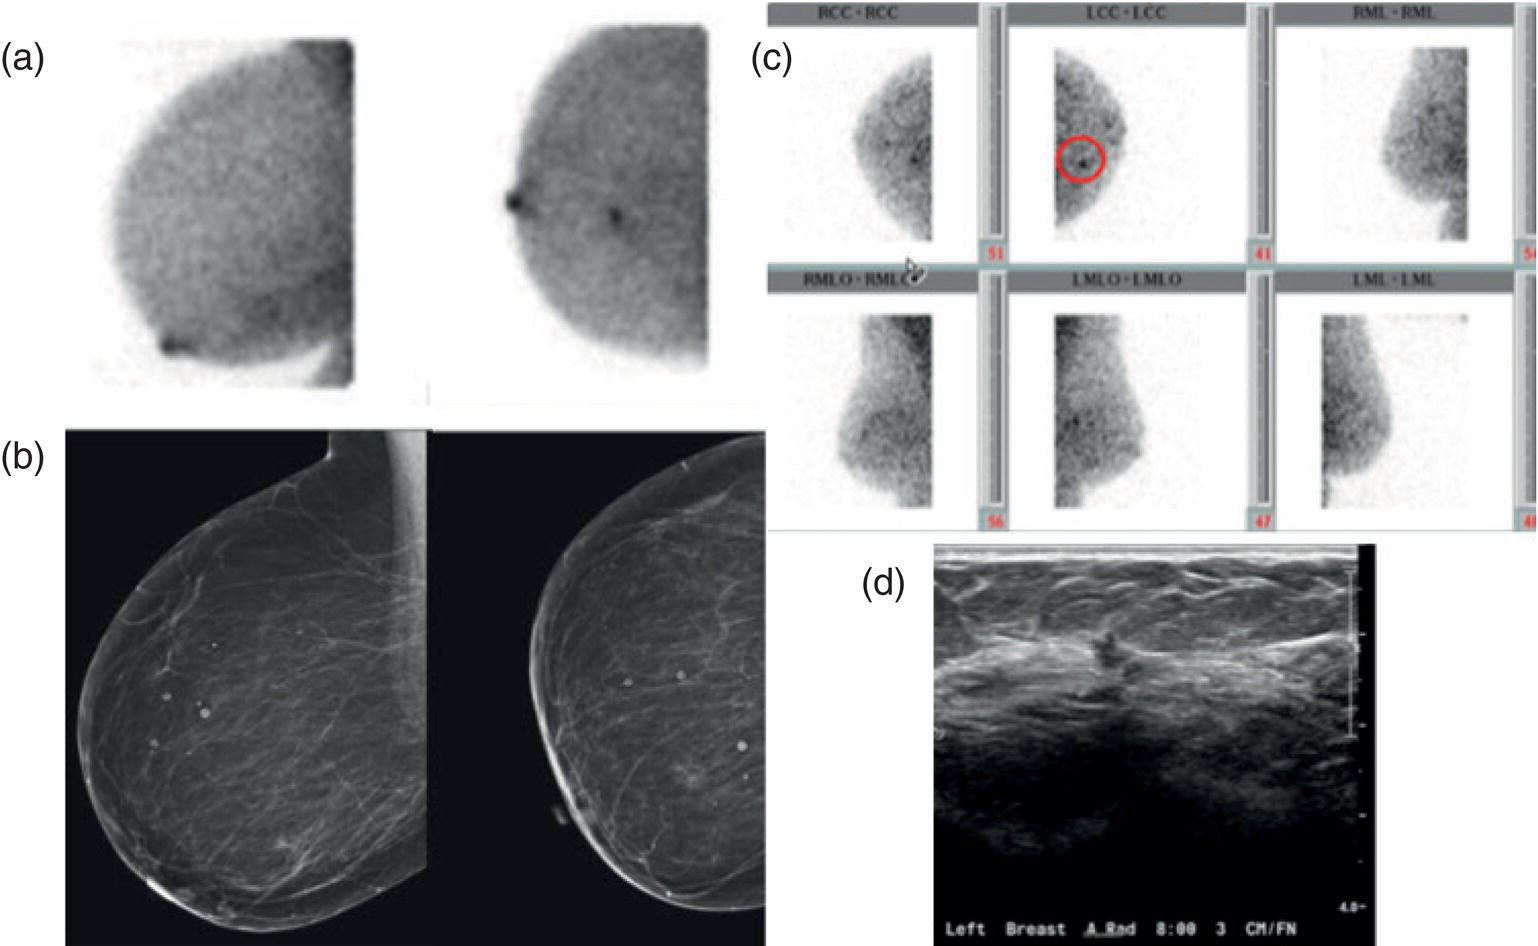 Schematic illustration of (a) MBI performed in this patient with a known malignancy in the contralateral breast demonstrates a focus of abnormal uptake in the central right breast. (b) “Second-look mammography” demonstrates a corresponding asymmetry seen when the nipple is in profile. (c) Molecular breast imaging in this patient with known right breast cancer demonstrates an abnormal focus of uptake in the medial left breast for which second-look ultrasound was recommended. (d) Second-look ultrasound demonstrates an irregularly shaped hypoechoic mass corresponding to the MBI finding.